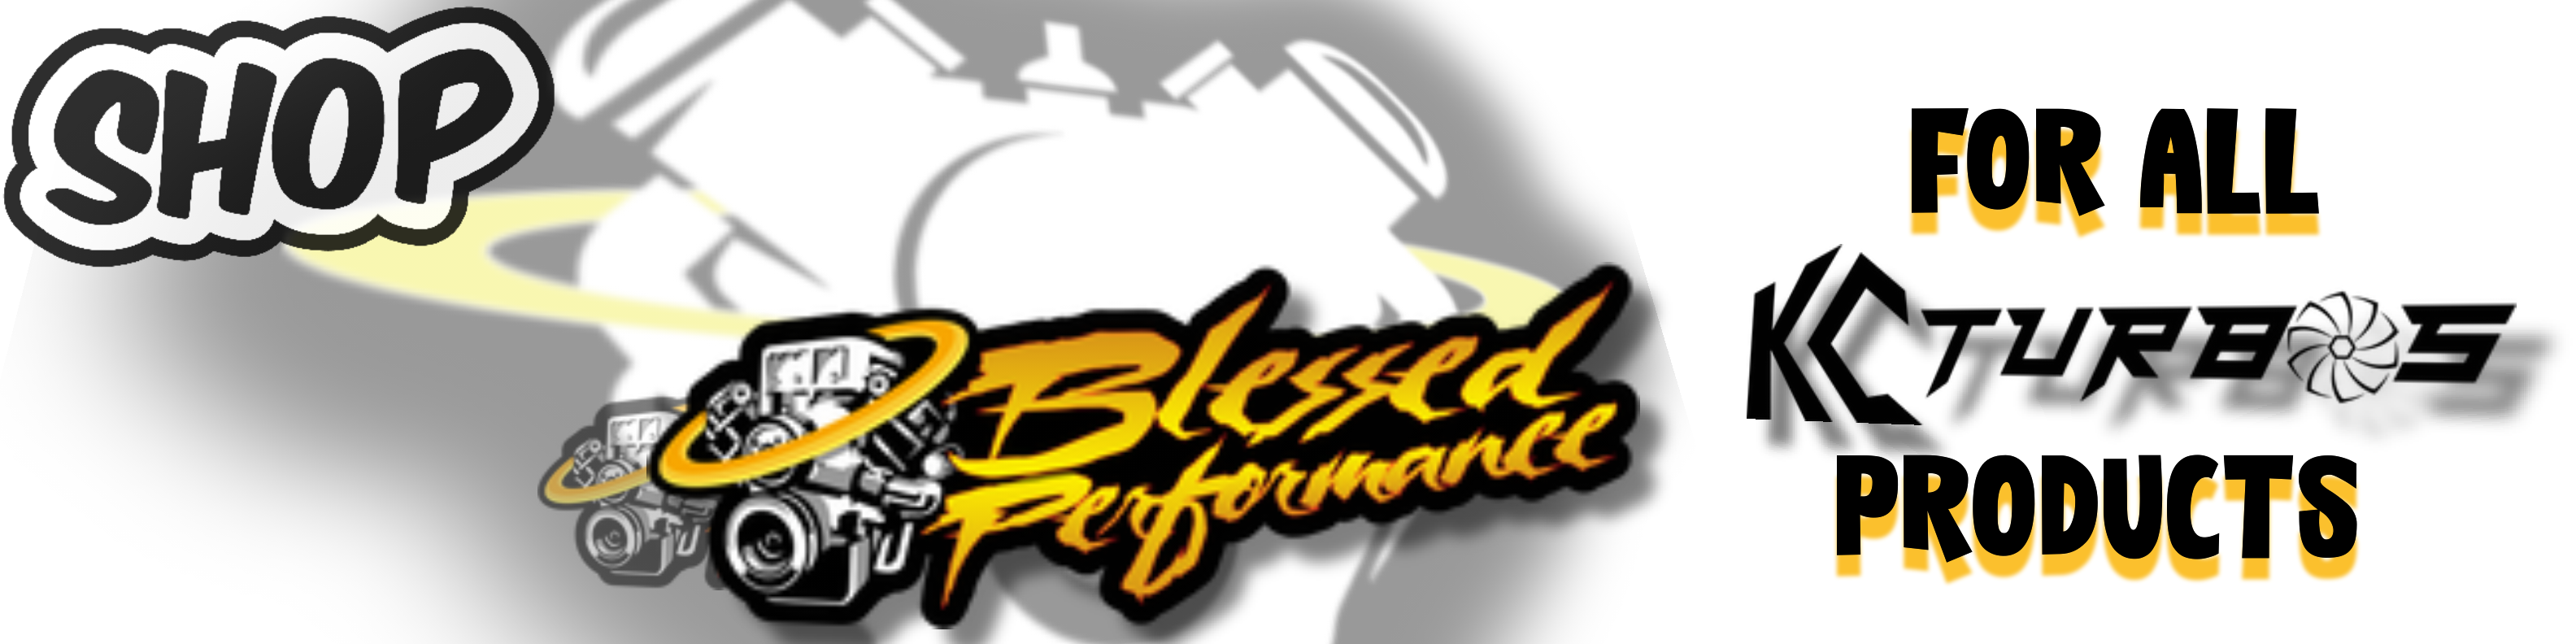 shop-blessed-performance-for-kc-turbos-banner.png